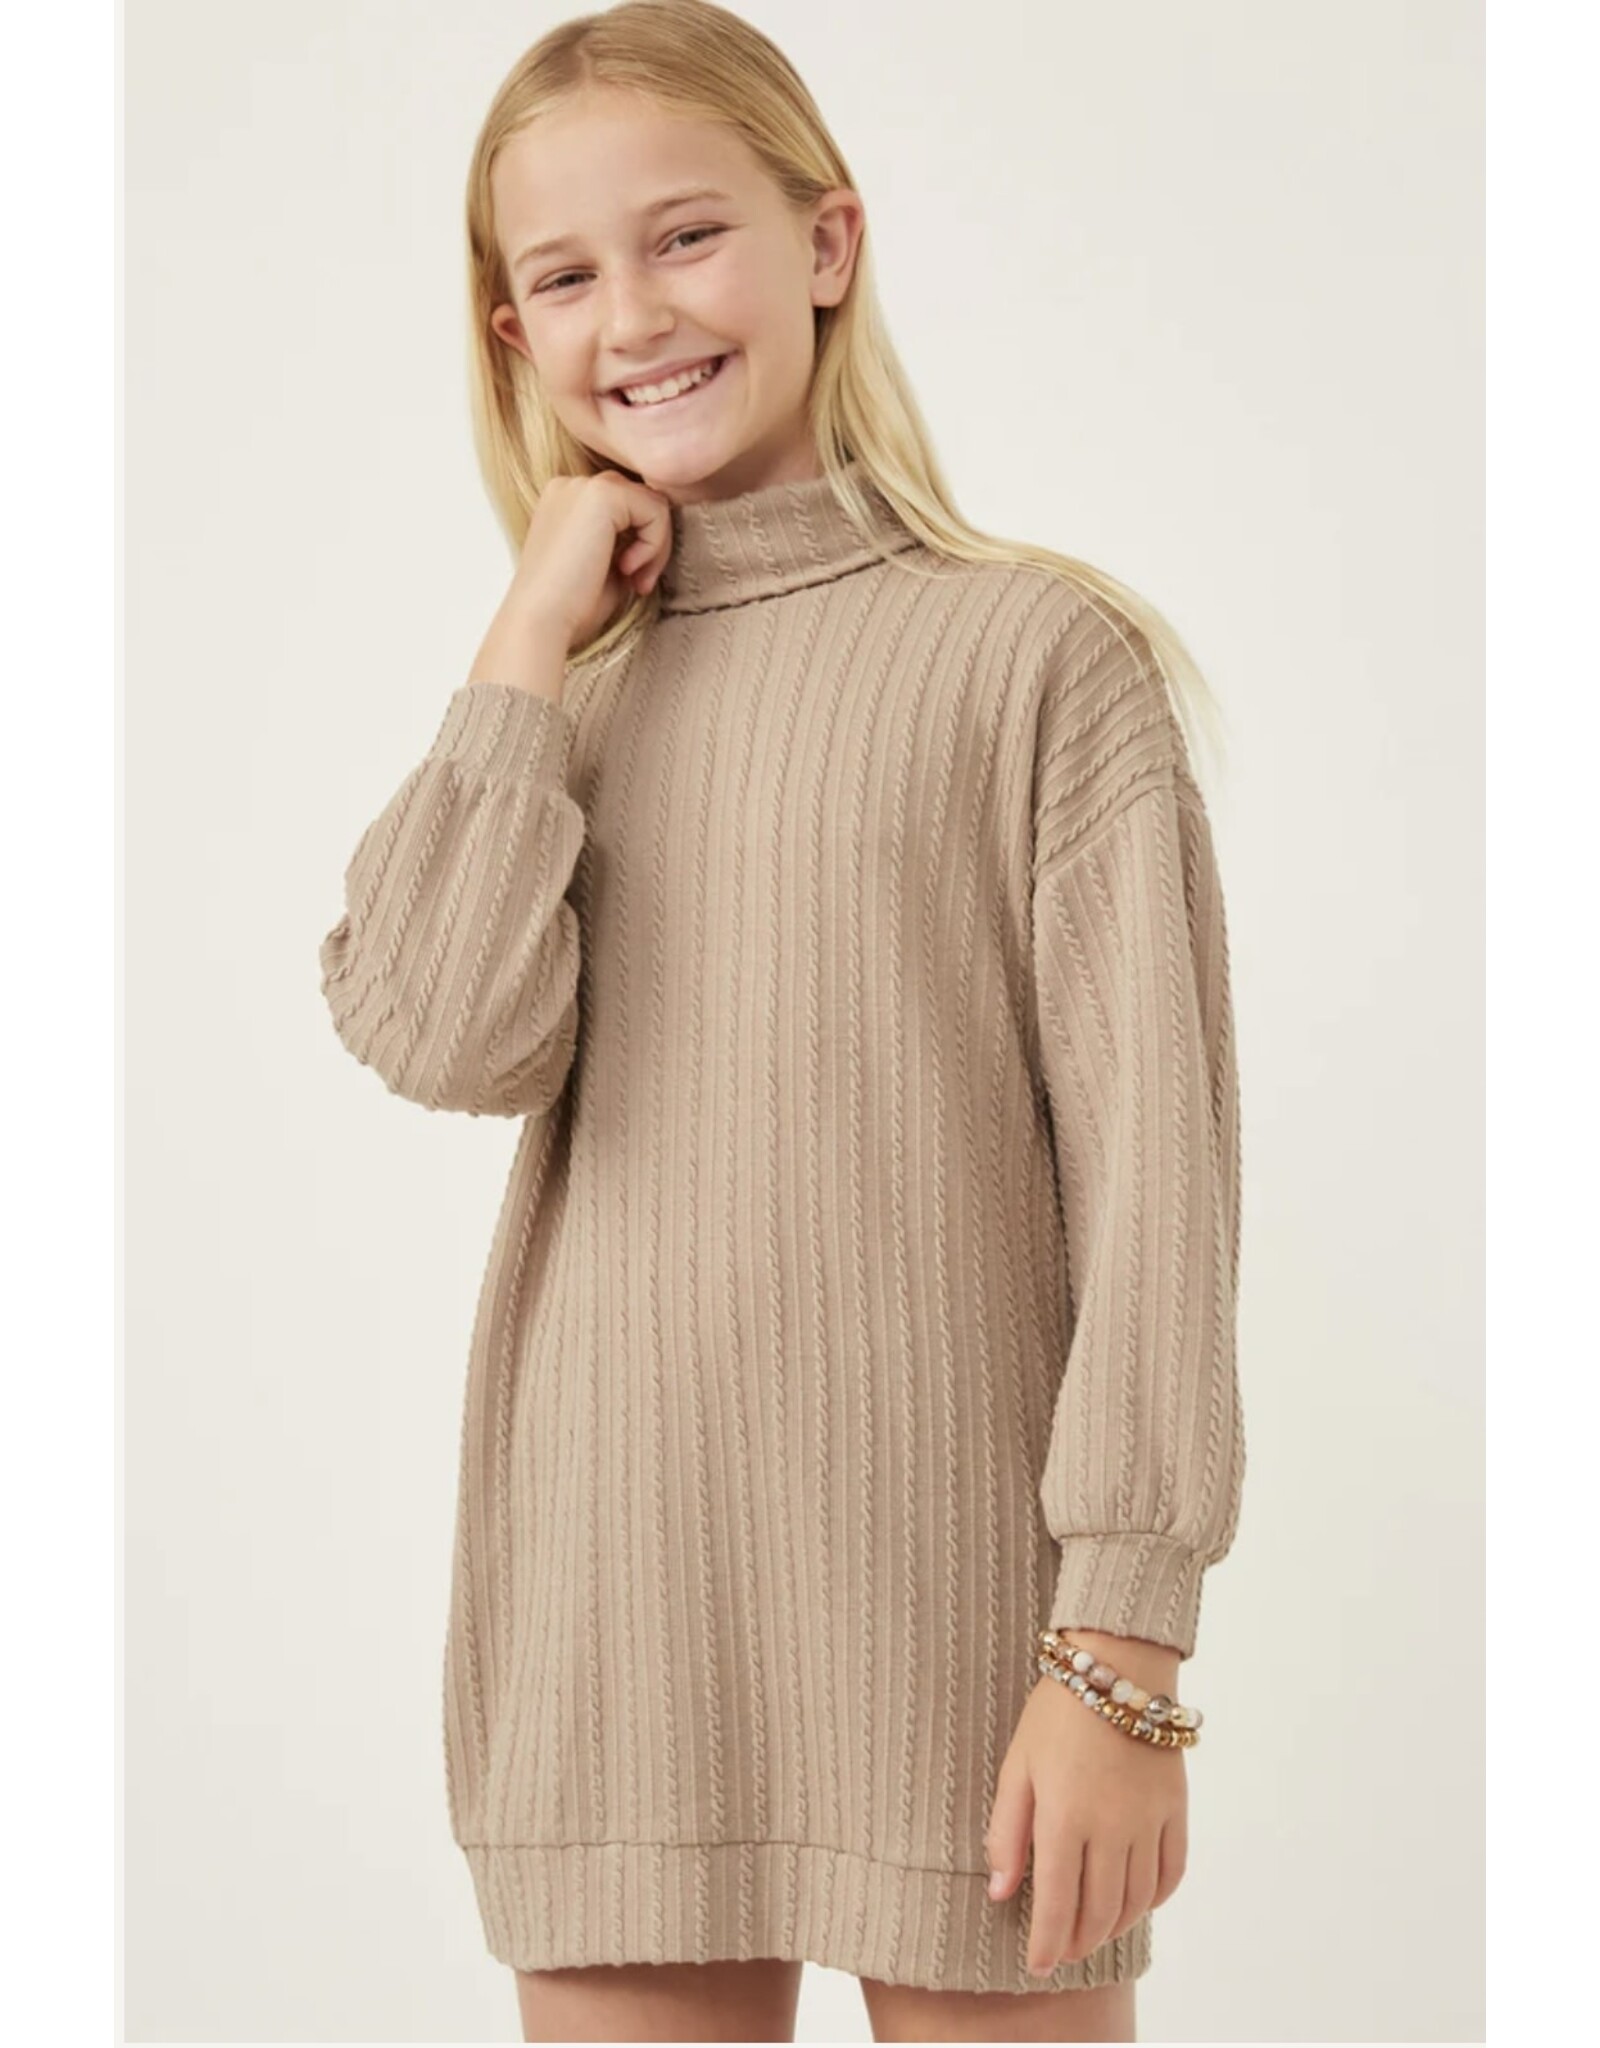 Hayden- Taupe Cable Knit Tunic Dress